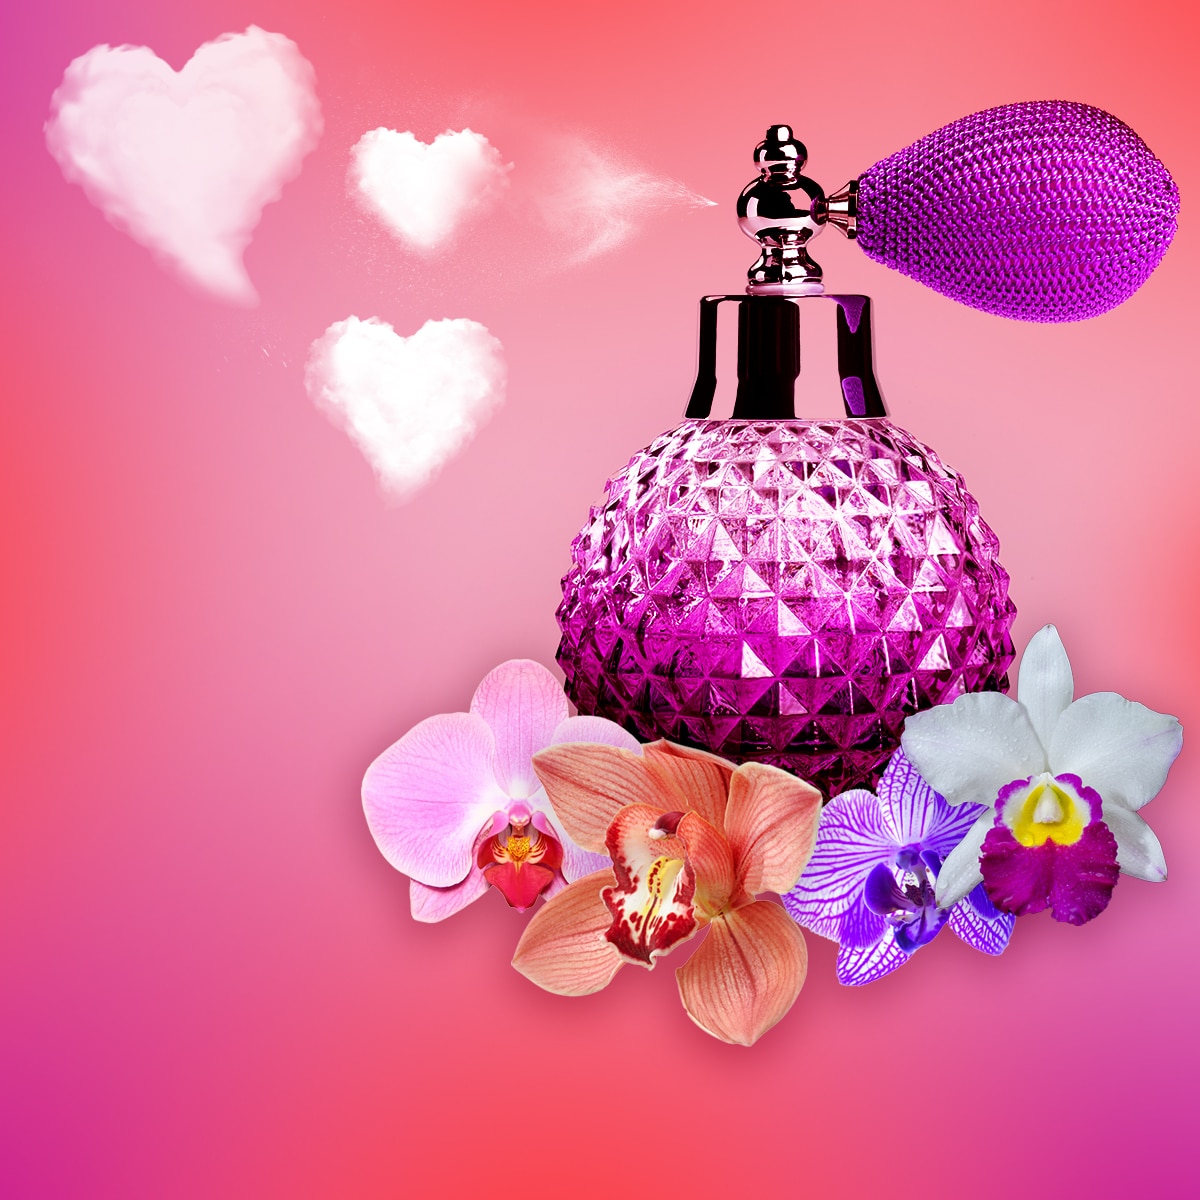 Valentine's Day, Can Fragrances Trigger Arousal, Scents To Get You in the Mood